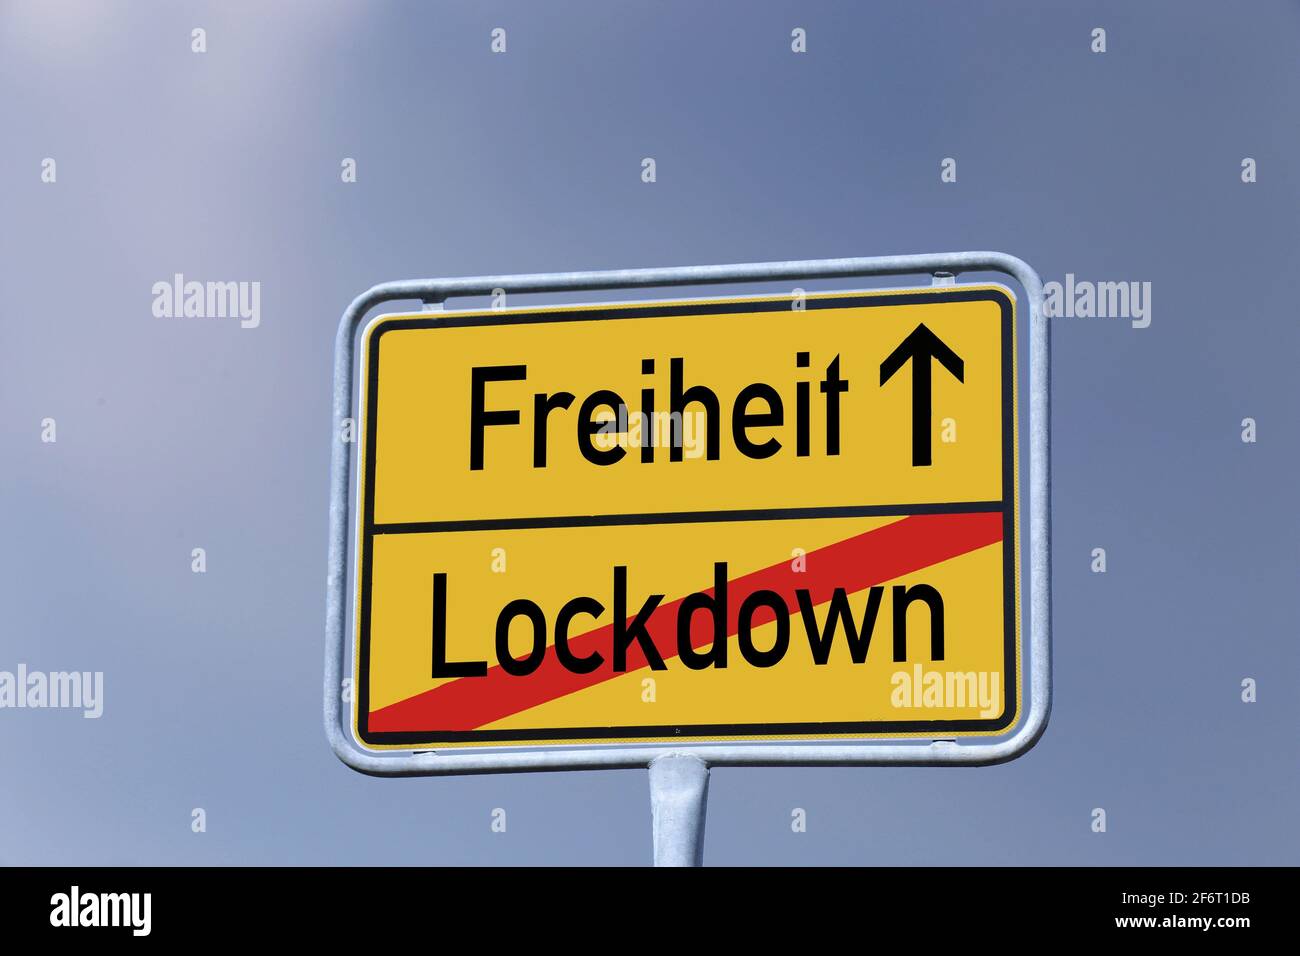 Symbol image: German town-sign with the letters Freiheit / Lockdown (Freedom / Lockdown). Stock Photo